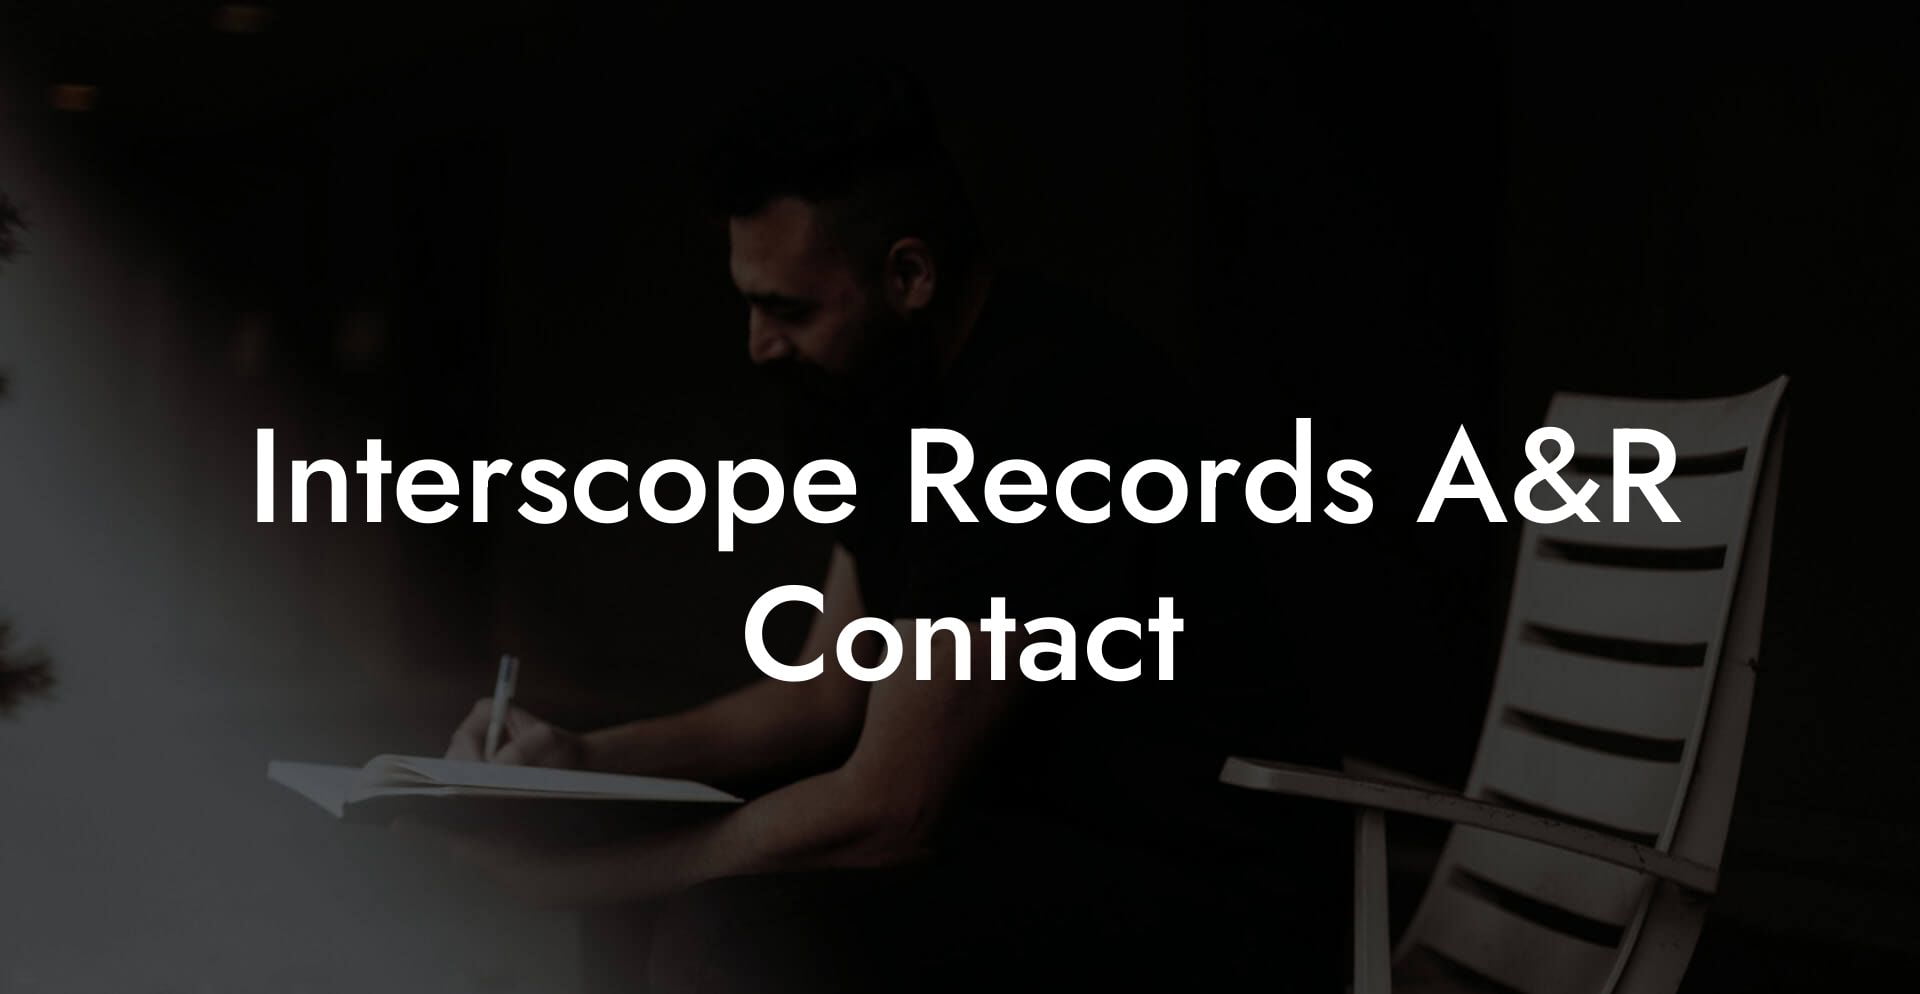 Interscope Records A&R Contact